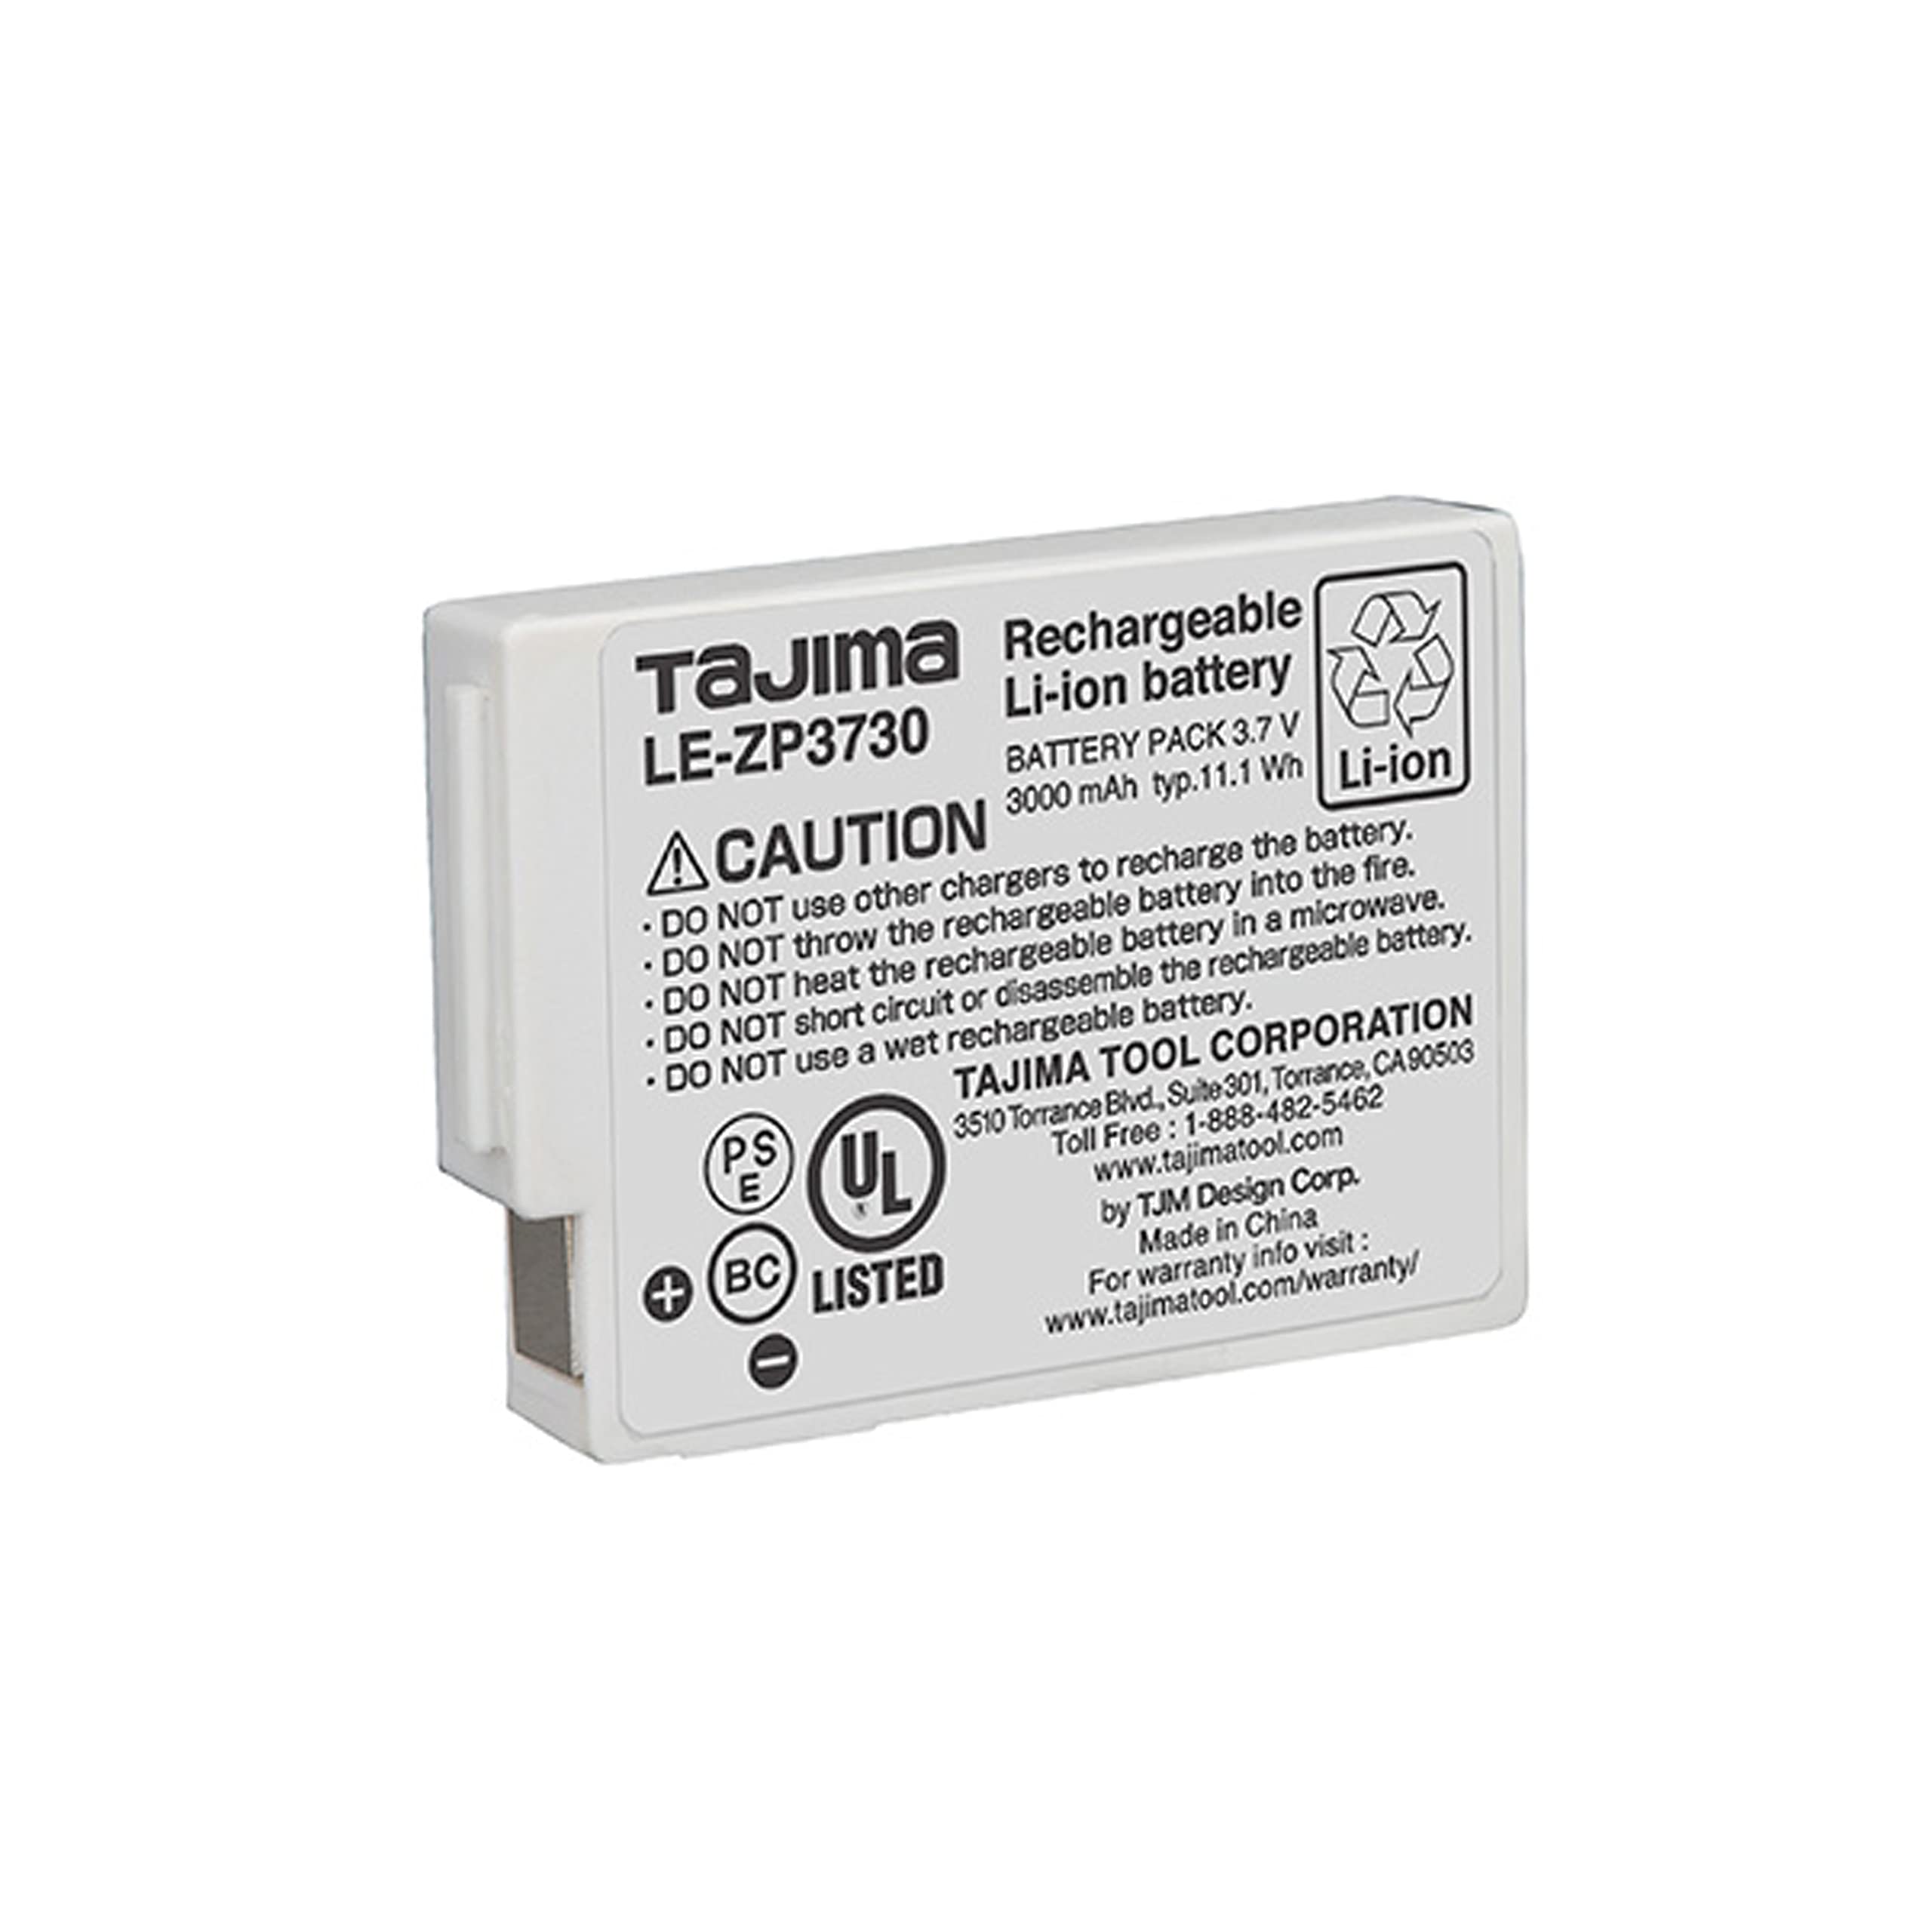 Tajima Grati-Lite Replacement Battery - Lithium-Ion Rechargeable Battery with 3.7V & 3000mAh - LE-ZP3730